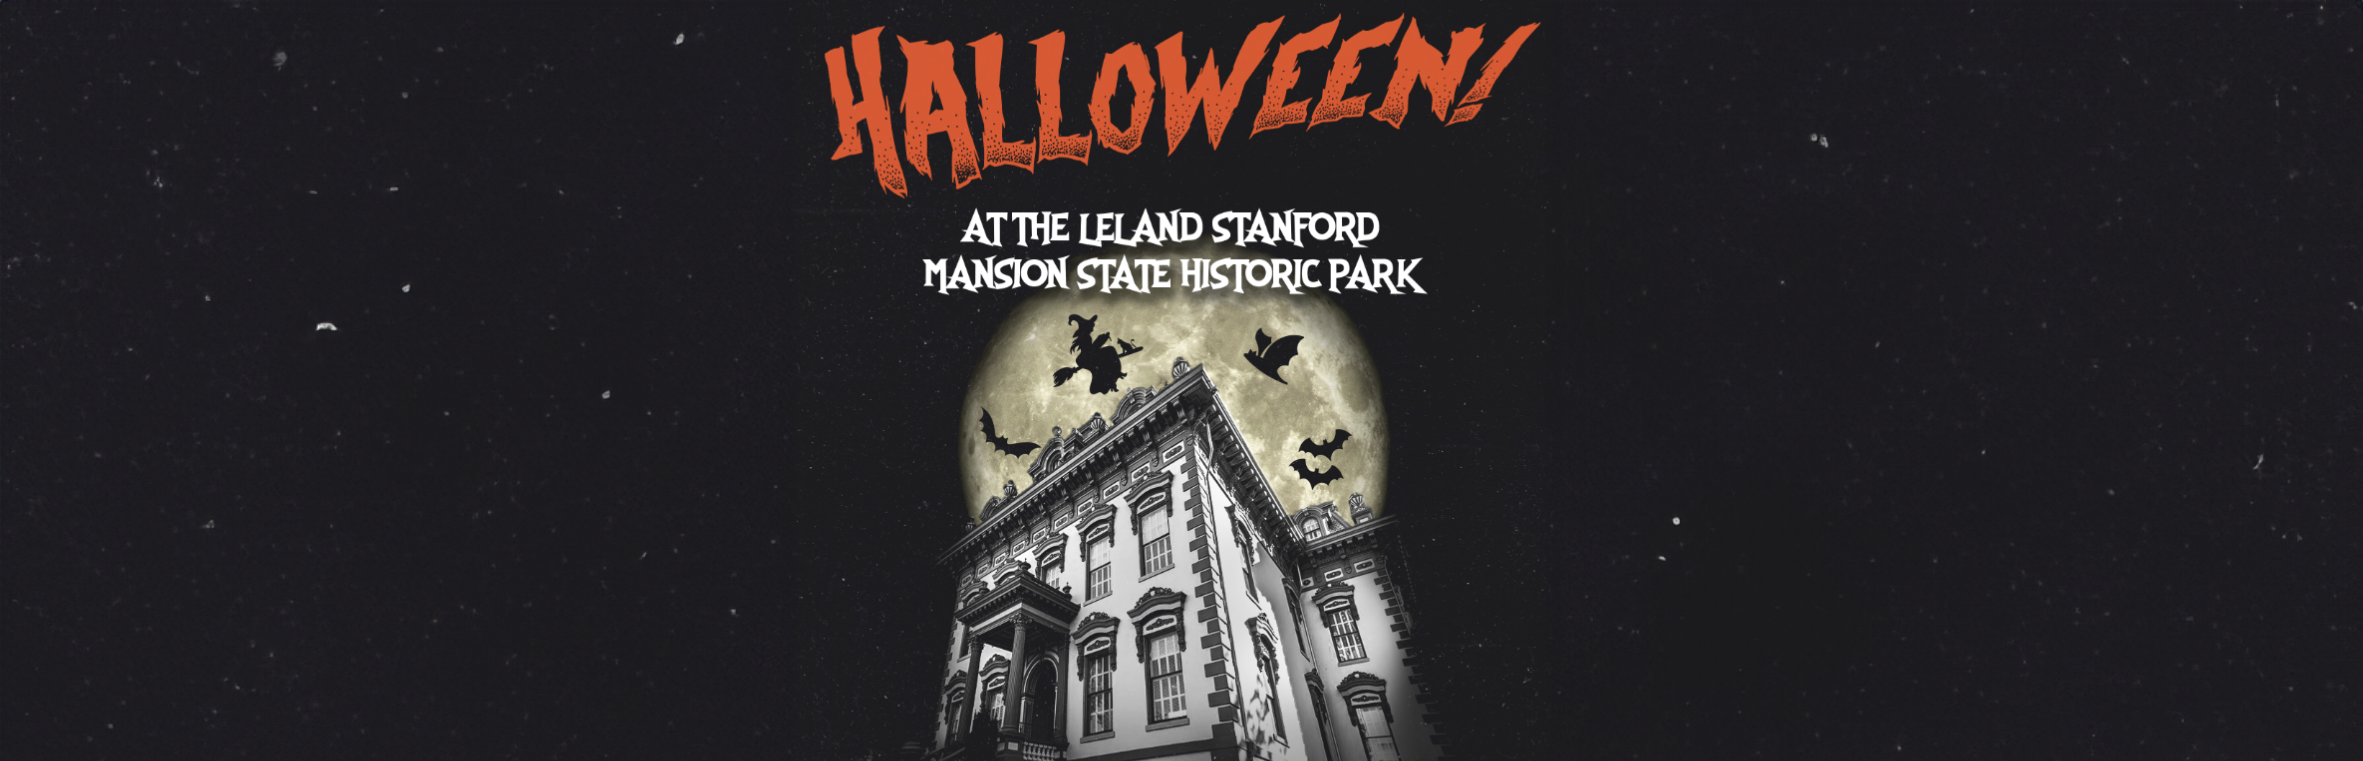 Halloween at the Leland Stanford Mansion